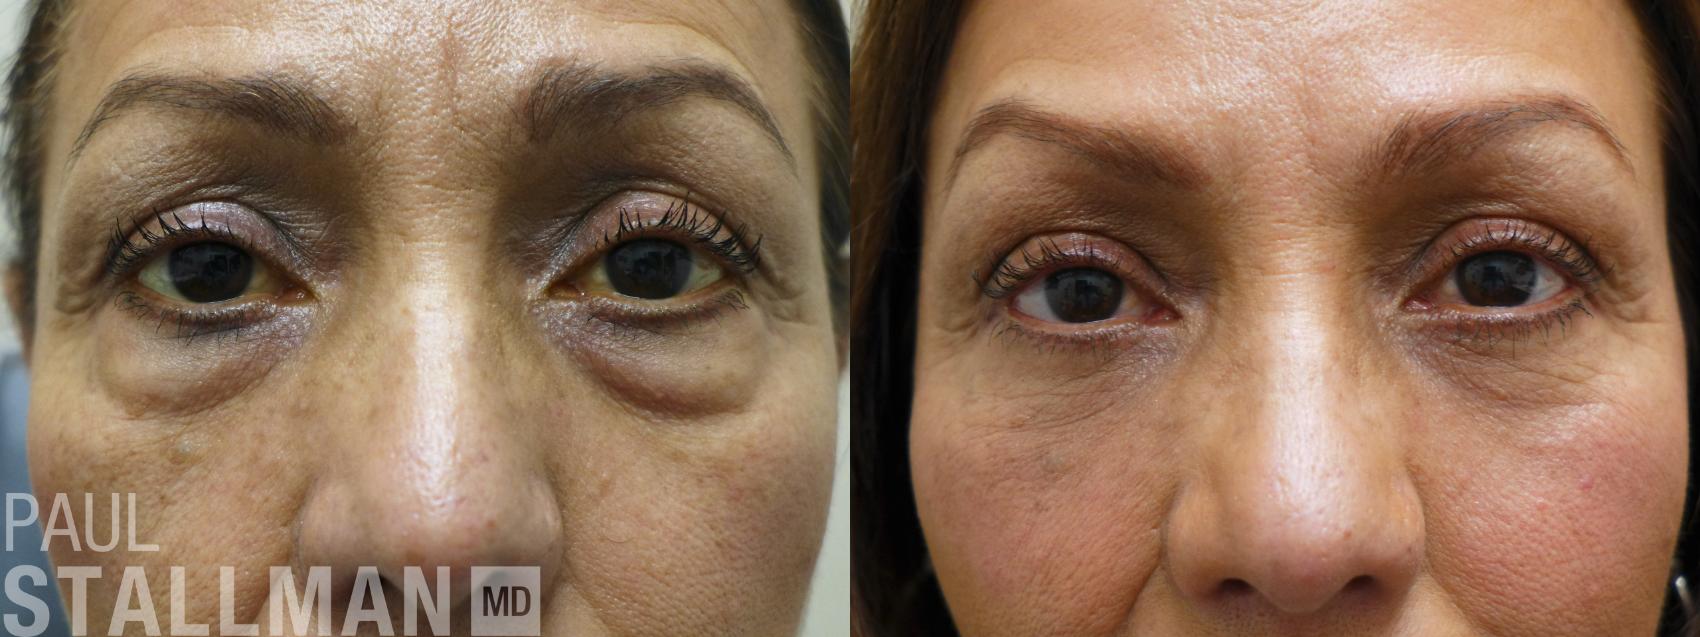 Before & After Blepharoplasty for Women Case 176 Front View in Fresno, Santa Maria, San Luis Obispo, CA